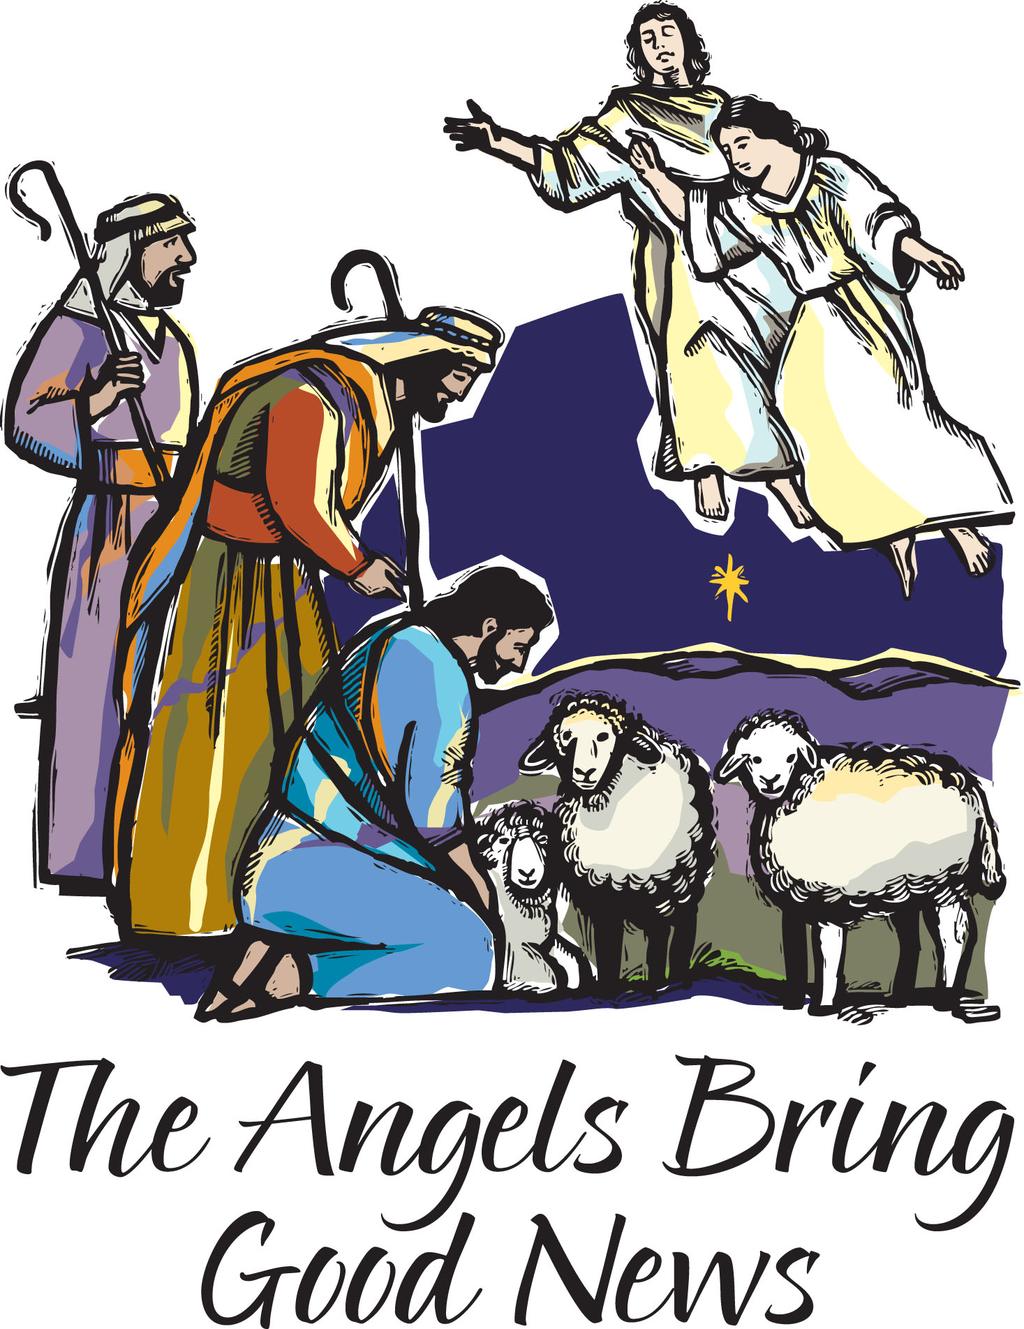 to you is born this day in the city of David a Savior, who is the Messiah, the Lord. Describe an angel as a messenger of God. Identify who are the messengers today of God s good news.